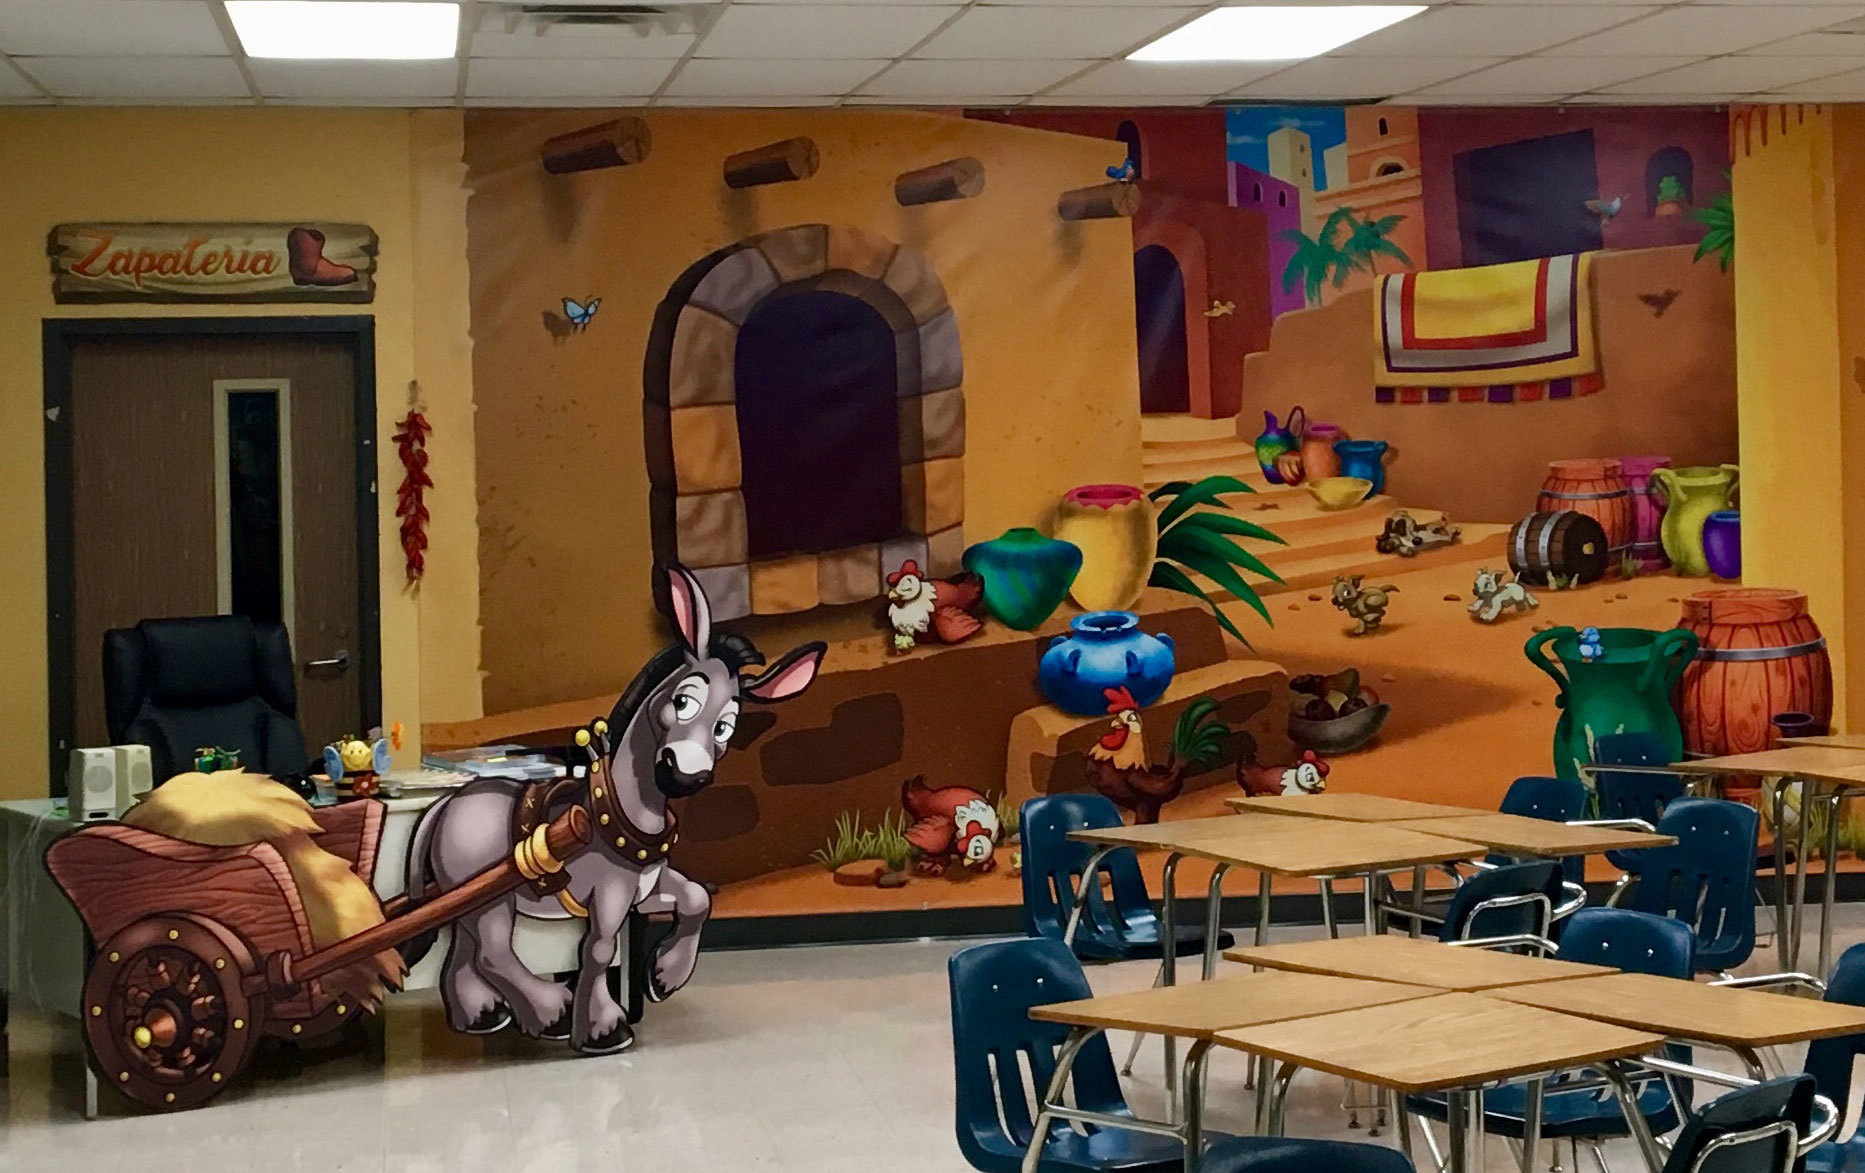 Mexico Themed Wall mural and 2D mule and cart Desk Cutout for Classroom in Florida School